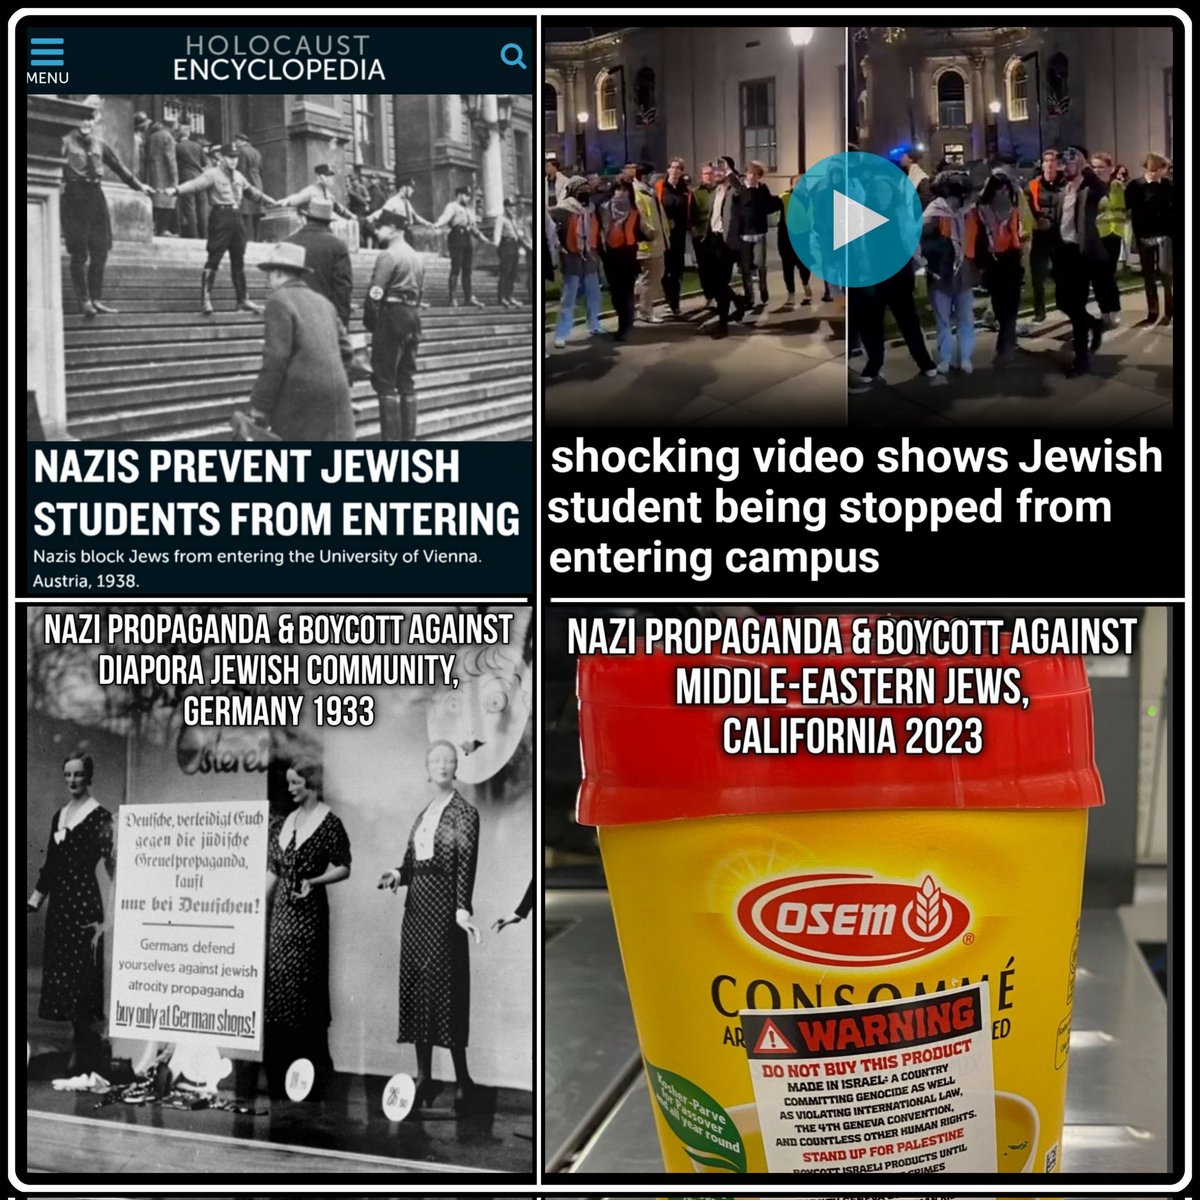 Past Nazis vs. Present Nazis: Same Nazis – just different rhetorical optics tailored to be compatible with the contemporary culture for justifying why hating Jews is actually the moral high ground. Never drink the Nazi Kool-aid!